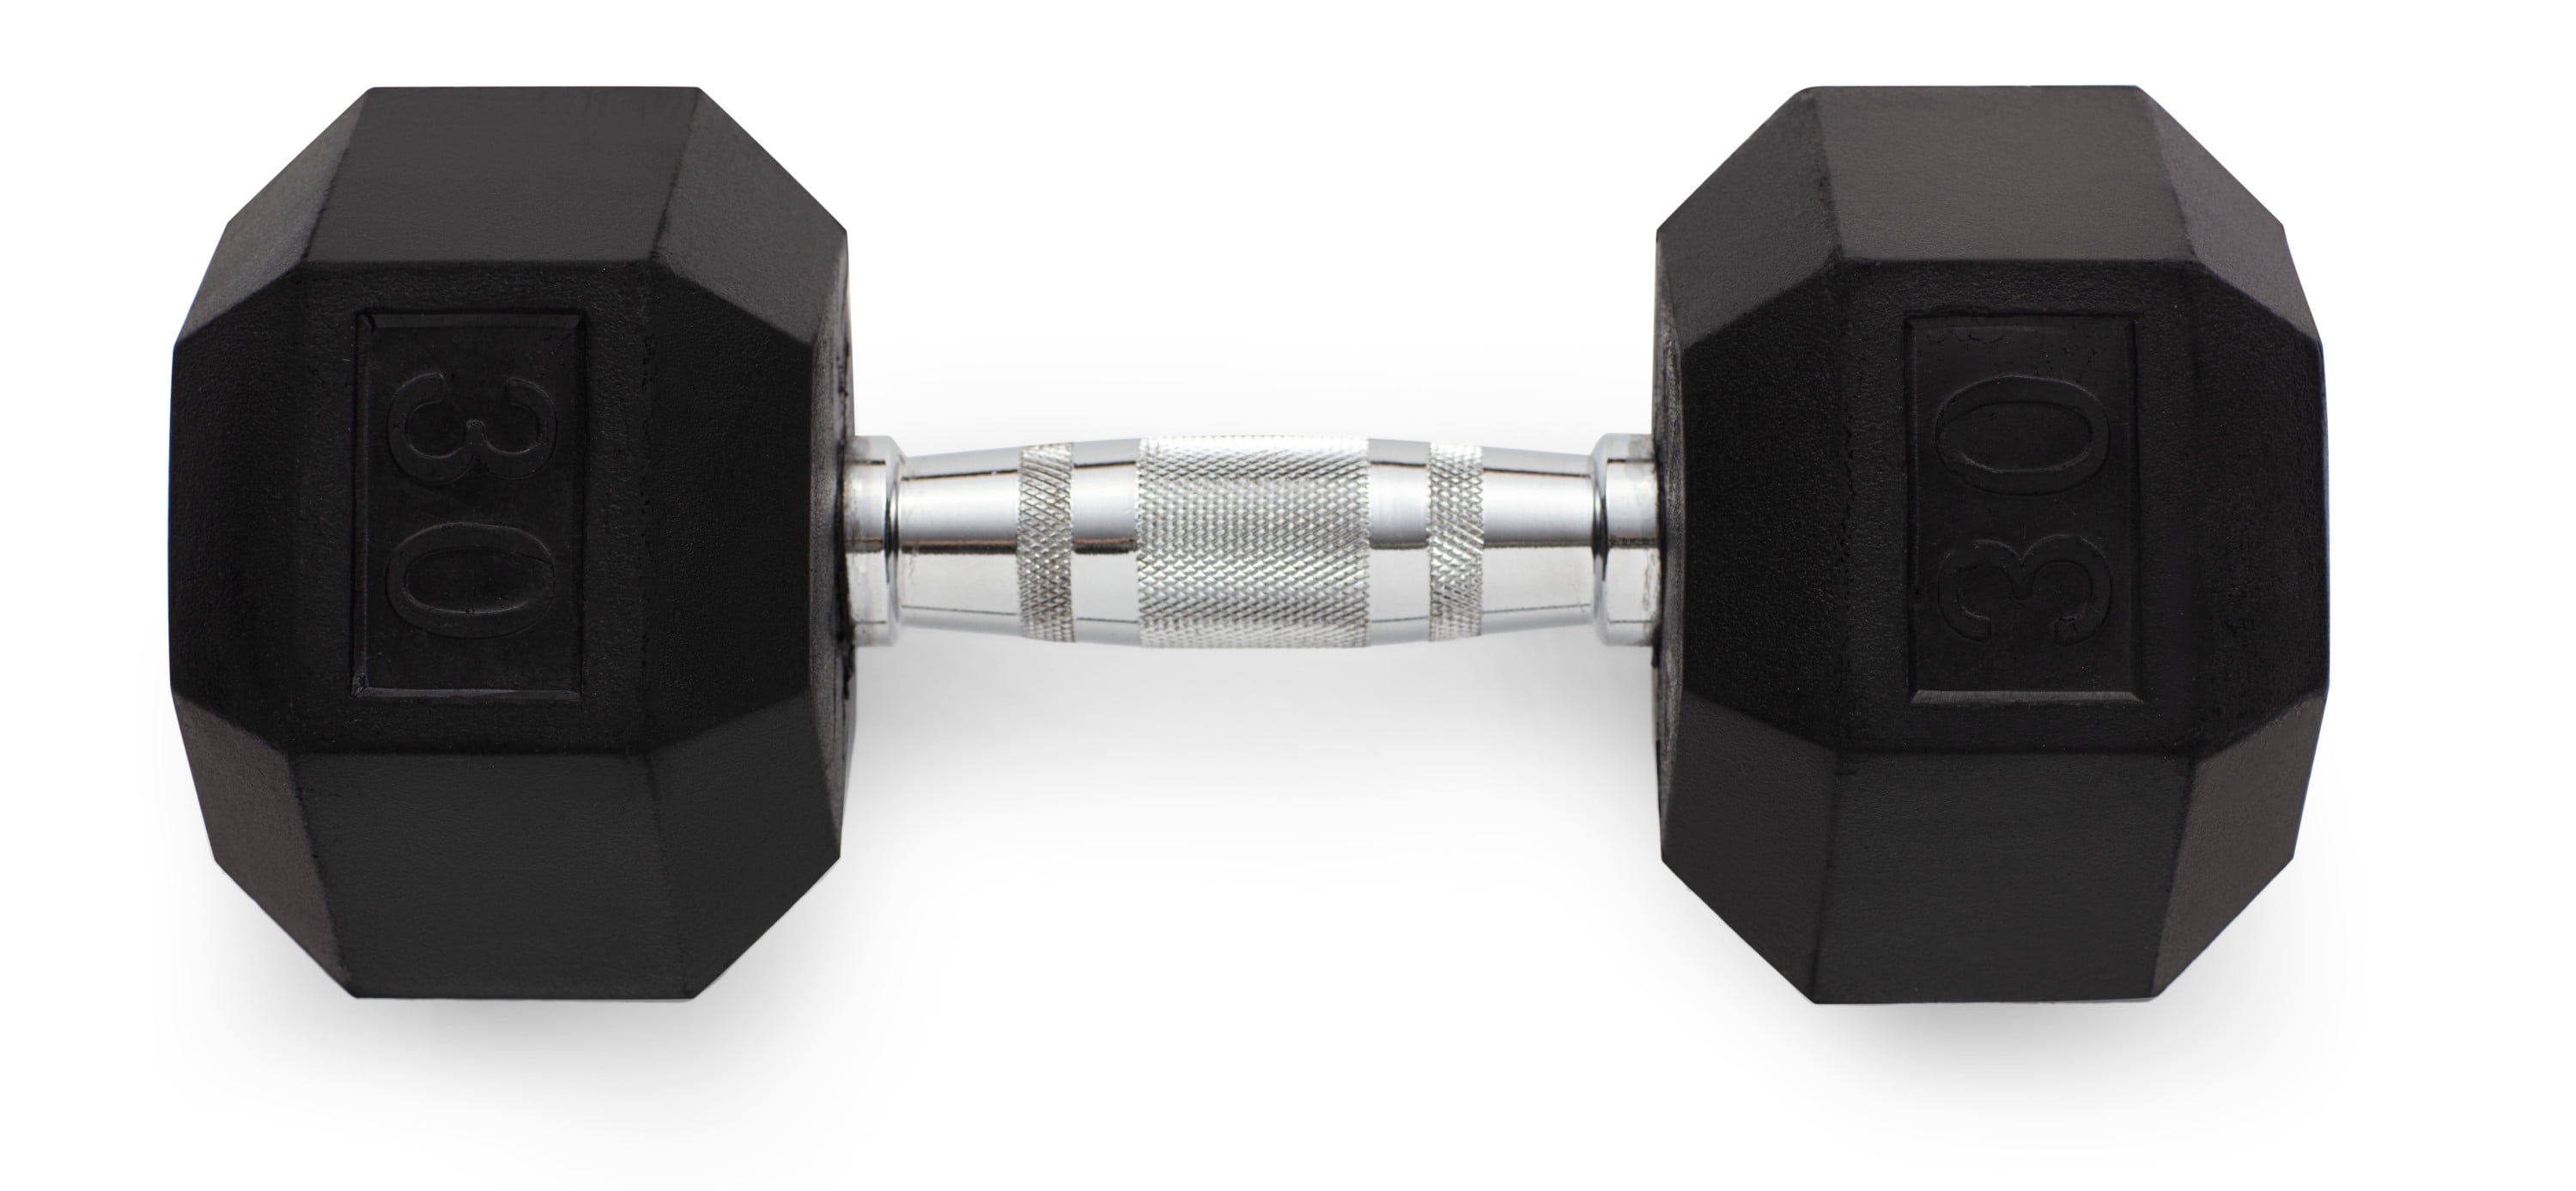 2 CAP 15lb Pound Dumbbells total 30lbs  HEX NEW FAST SHIPPING 